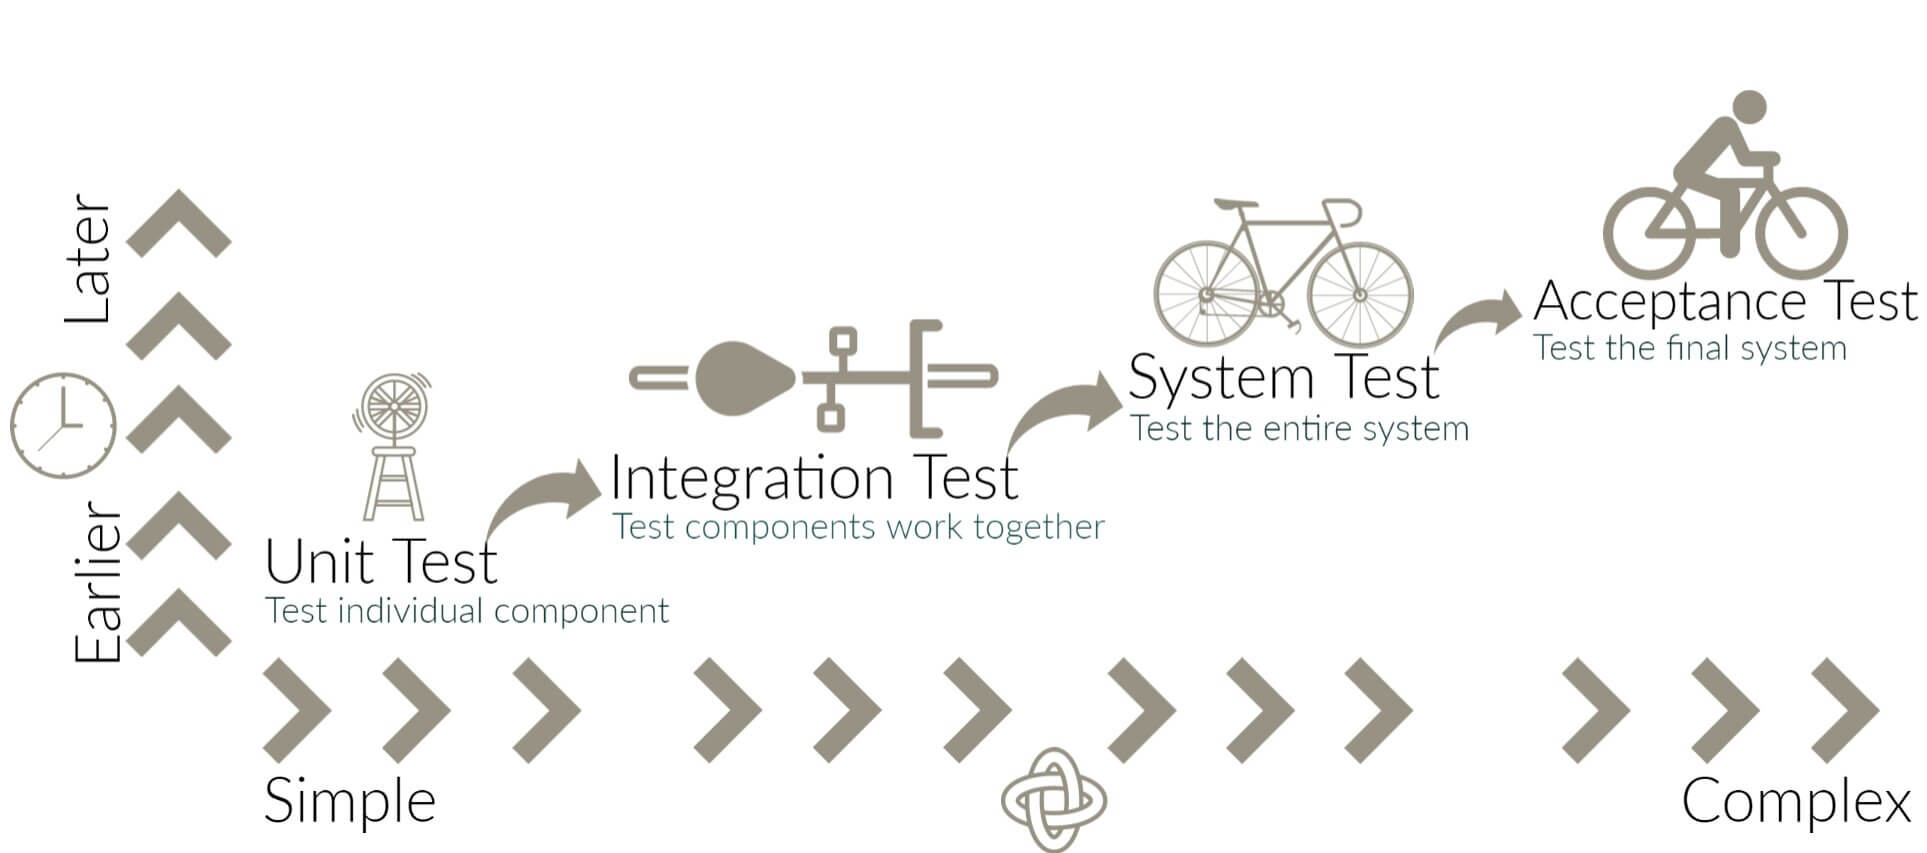 Each stage of the Four Levels of Software Testing increases in complexity and amount of time required to complete